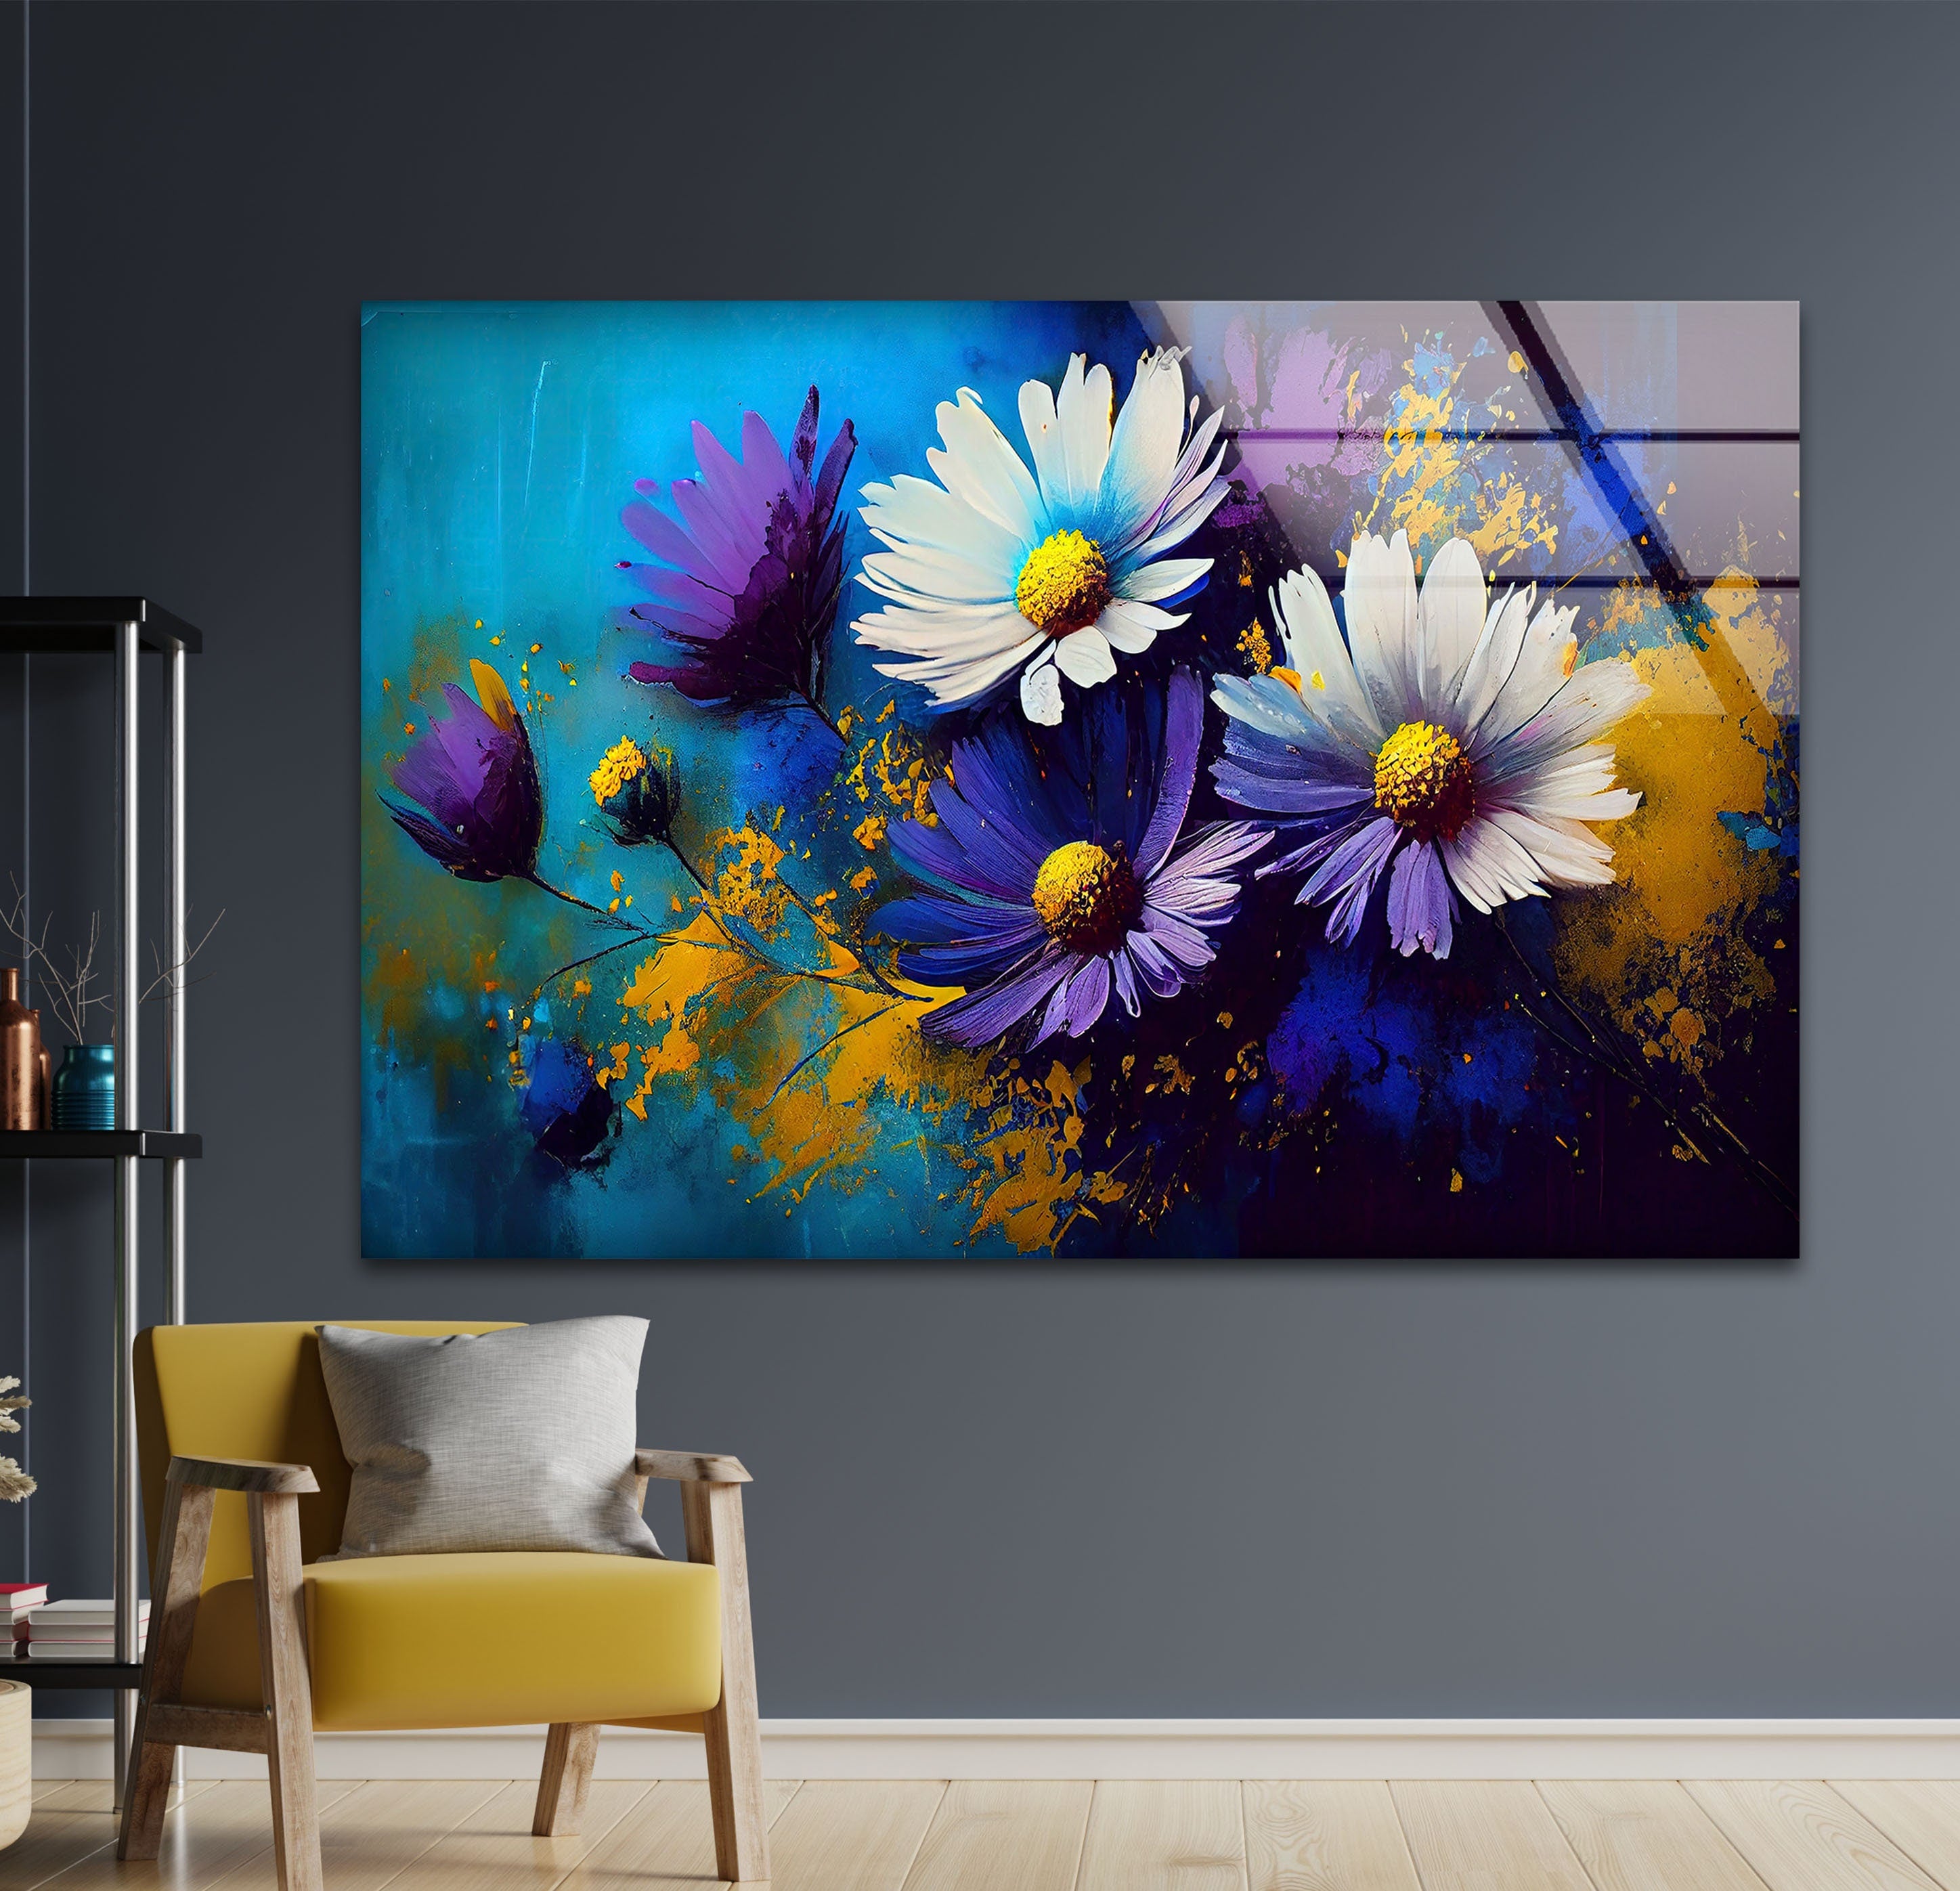 a painting of daisies on a blue and yellow background